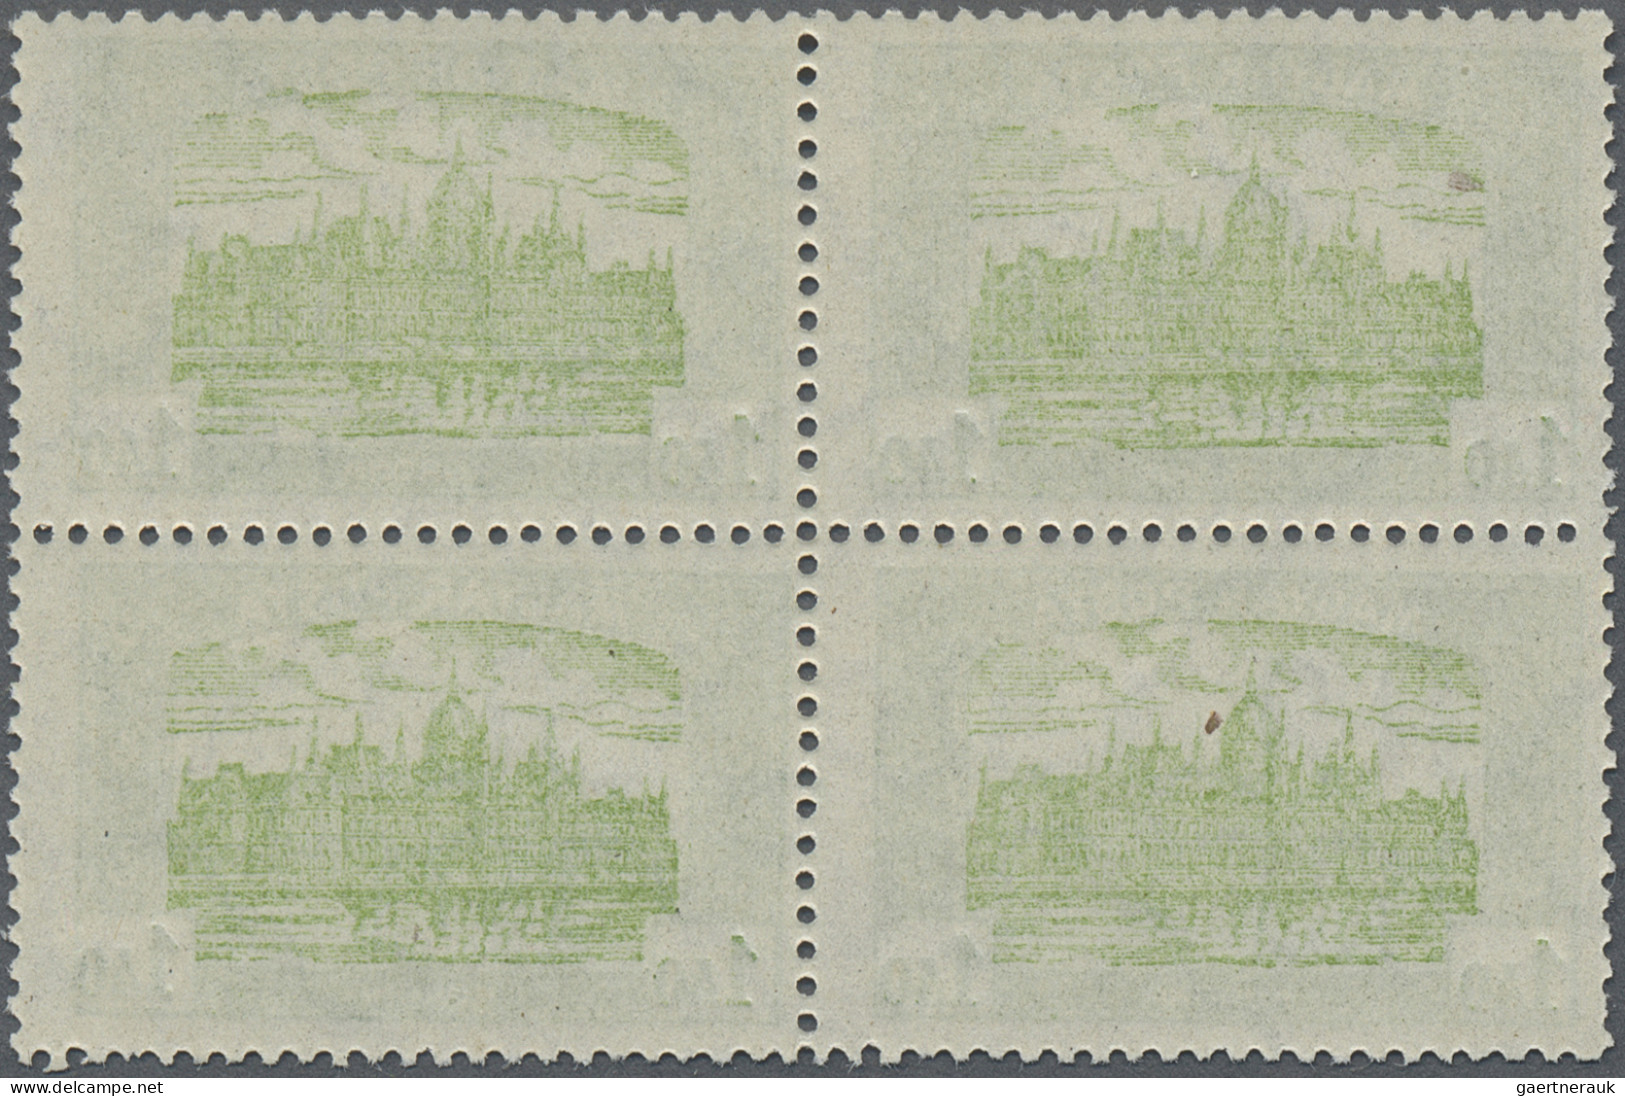 Hungary: 1919, Parliament Building Postage Stamps, 1.40 Kr In Mint Block Of Four - Ongebruikt